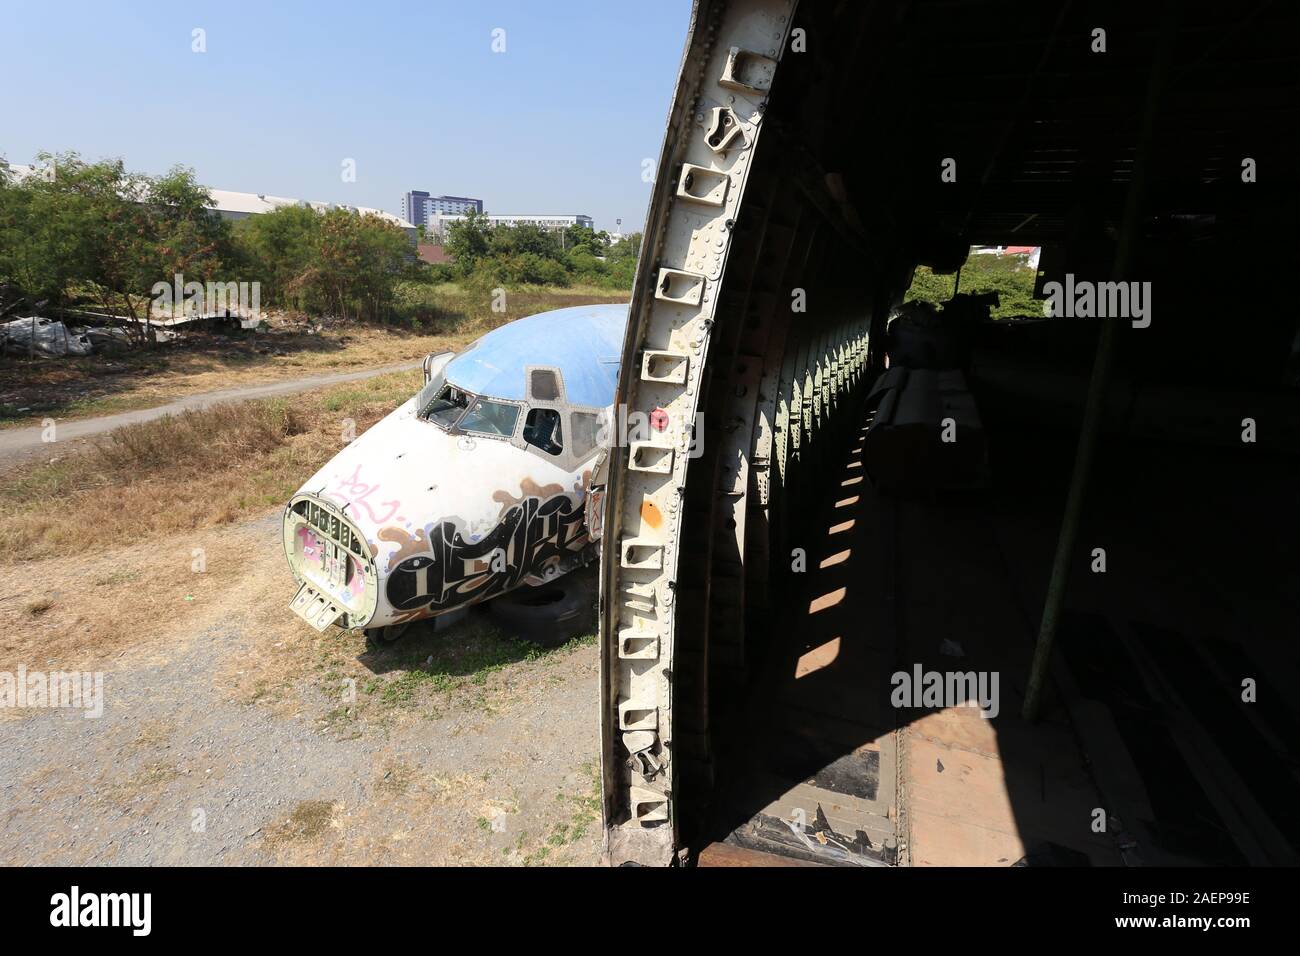 Bangkok's Airplane Graveyard hosts a handful of fuselages and airplane parts that have been partly covered by graffitti Stock Photo